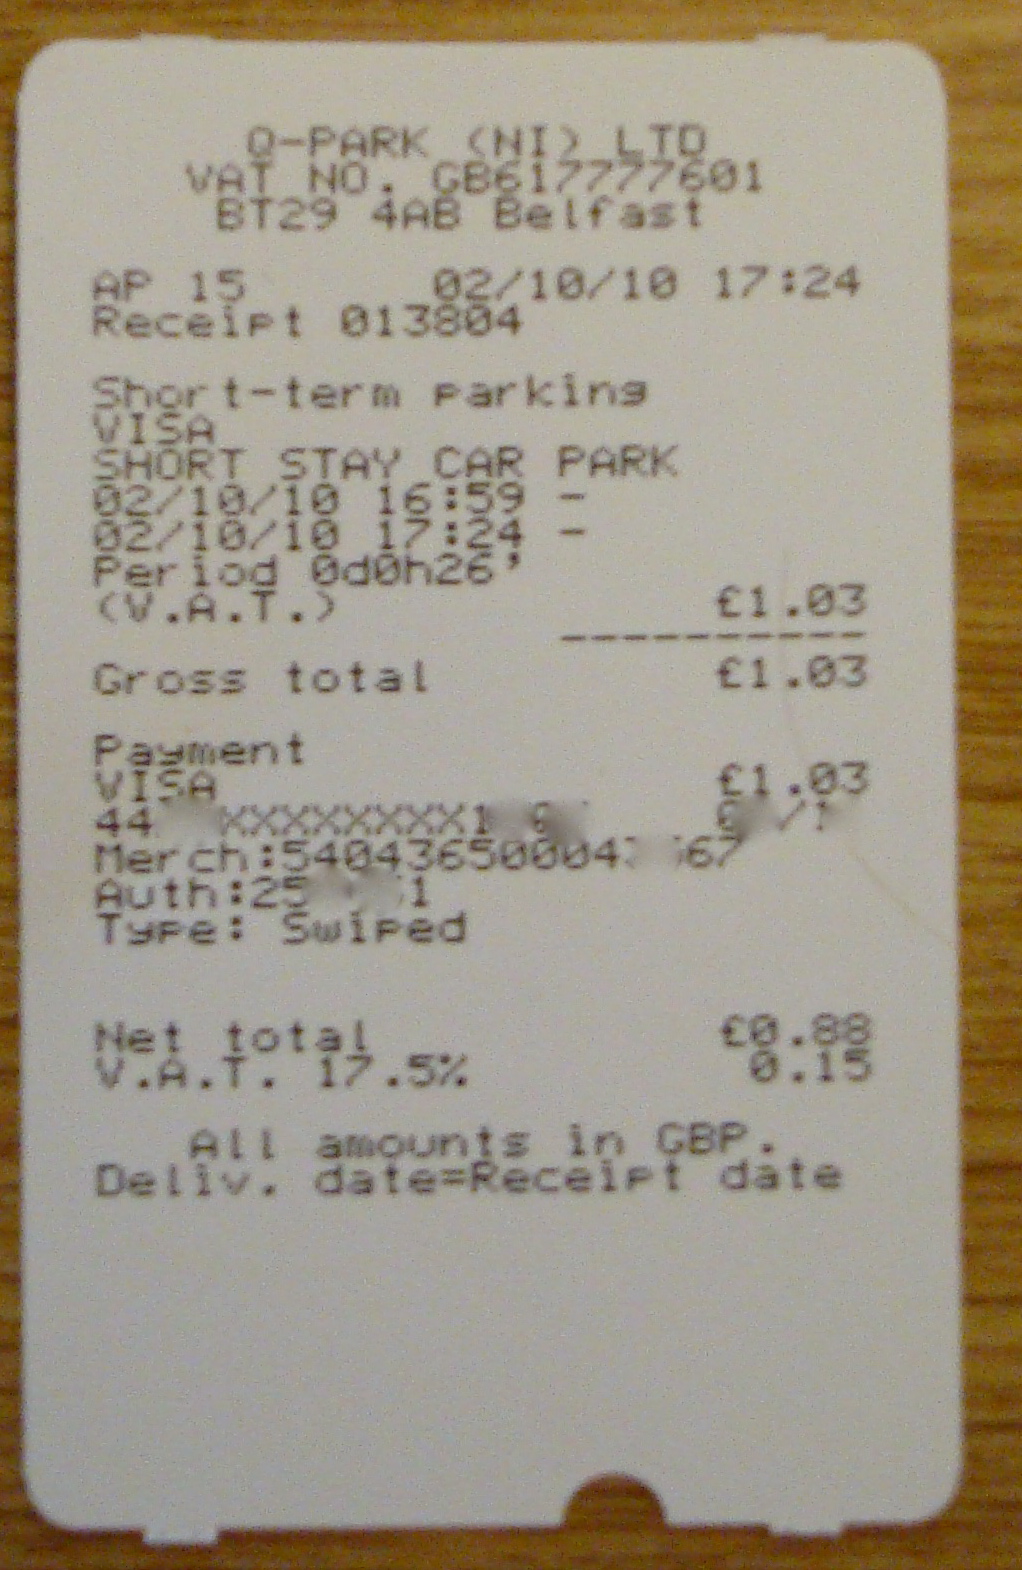 alan-in-belfast-3-plastic-surcharge-at-belfast-airport-car-parks